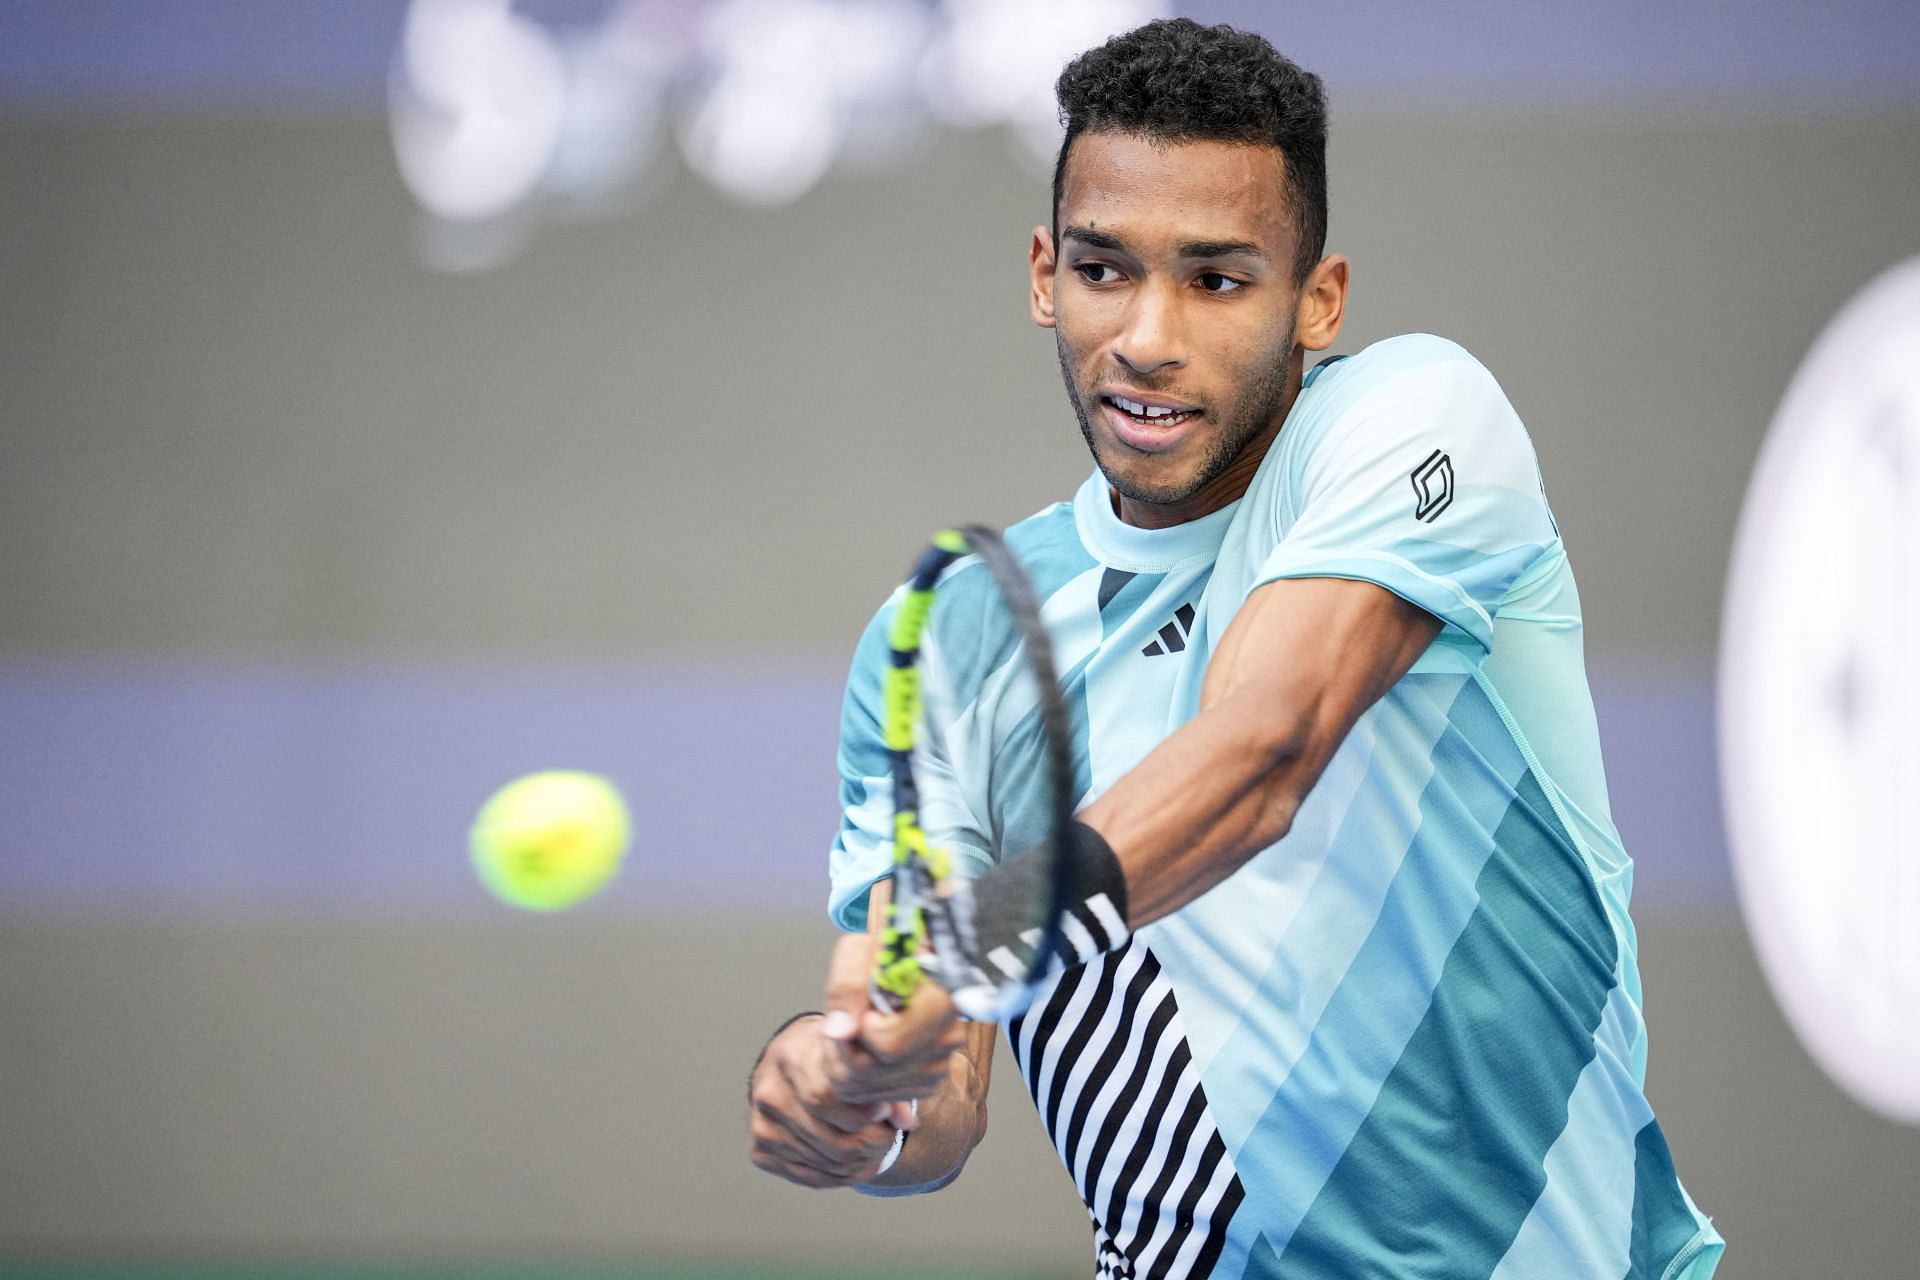 Felix Auger-Aliassime is the eighth seed at the 2023 Japan Open.